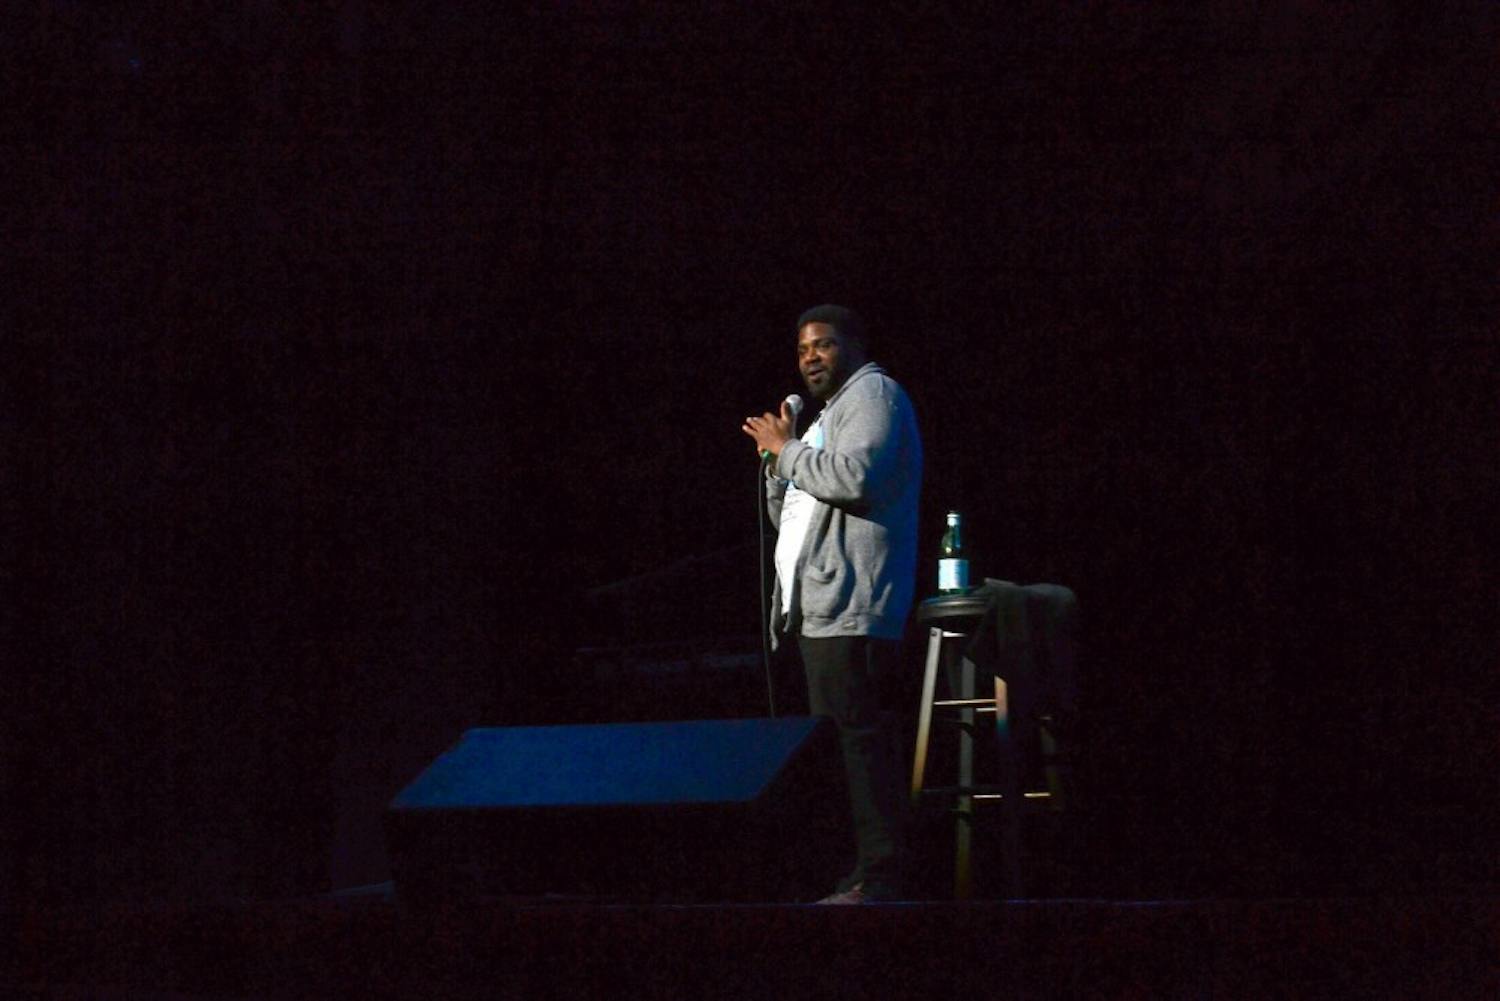 SNL Ron Funches&nbsp;appeared with comedians Anna Drezen and Alex Moffat&nbsp;as part of SA's Comedy Series Friday night.&nbsp;